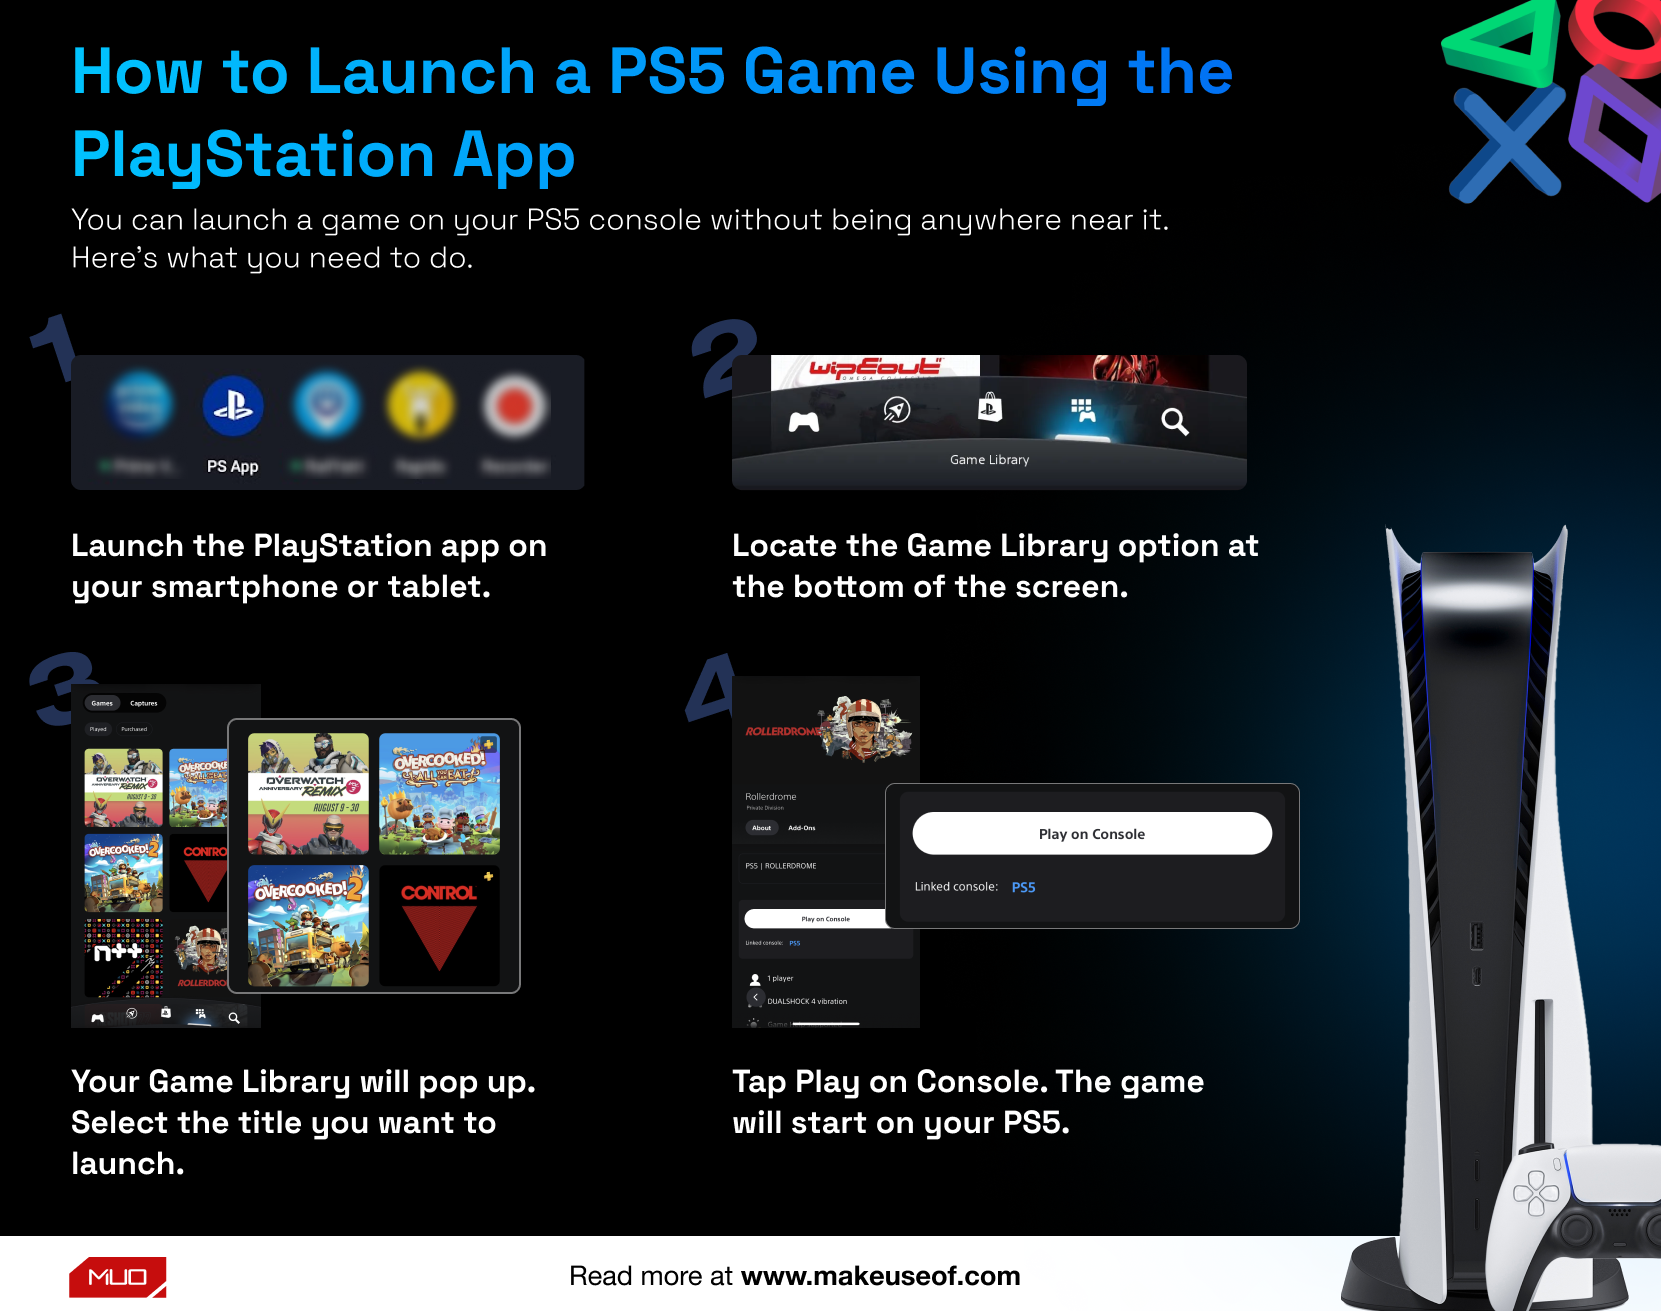 How to Launch a PS5 Game Using the PlayStation App